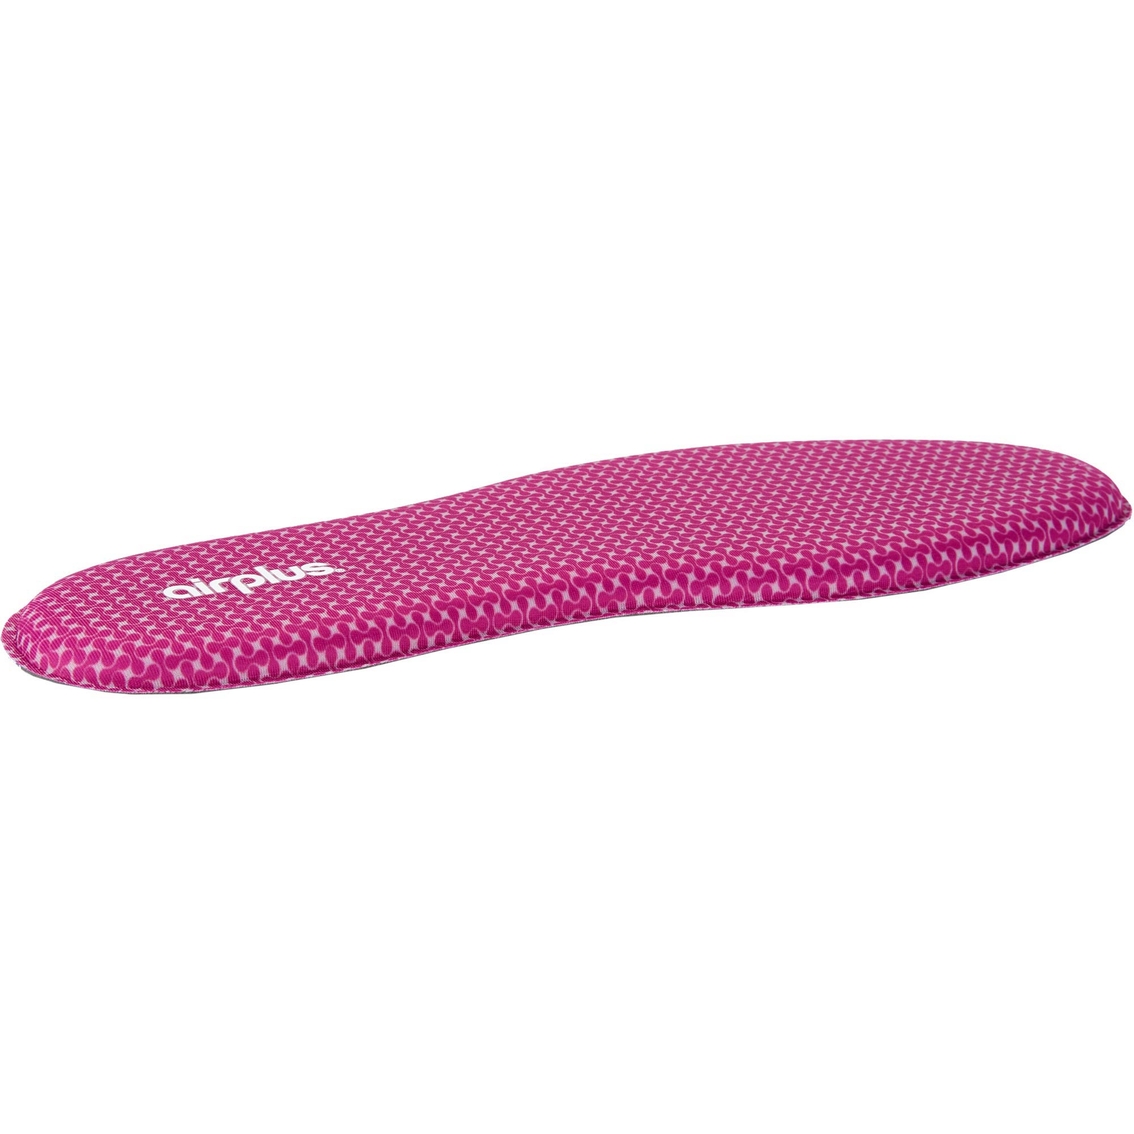 Airplus Women's Memory Comfort Shoe Insoles for Pressure Relief, Size 7 to 13 - Image 5 of 7